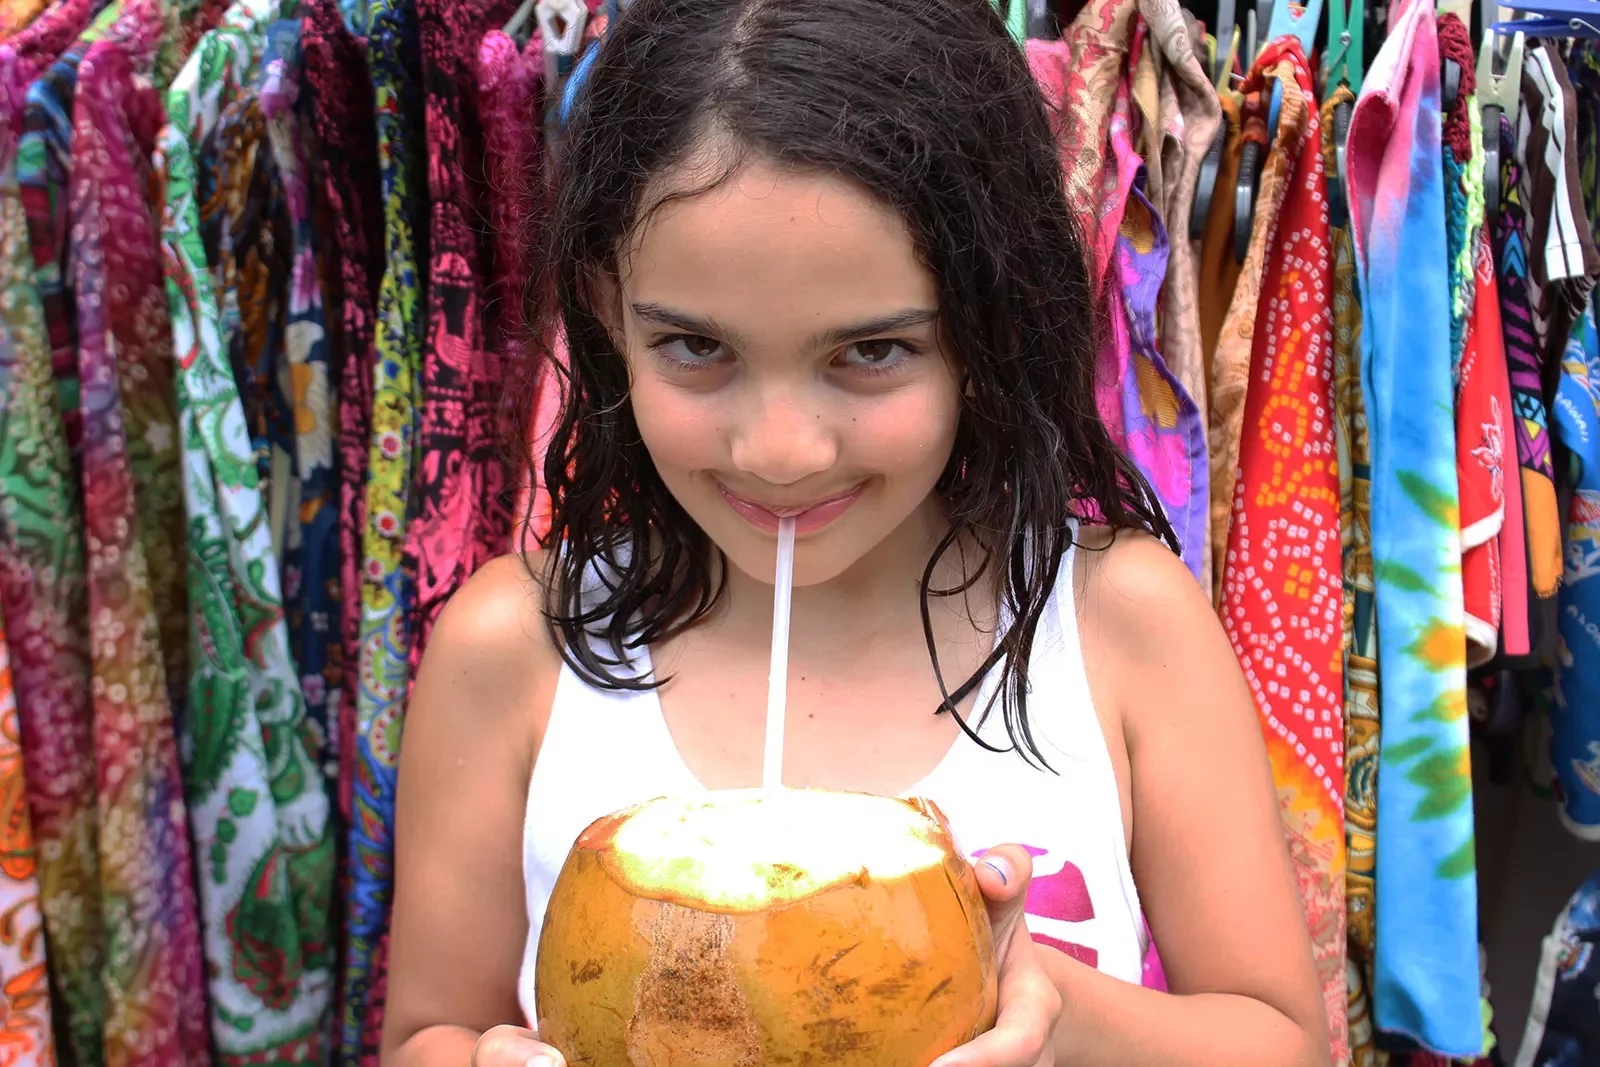 Guest Drinking From Coconut